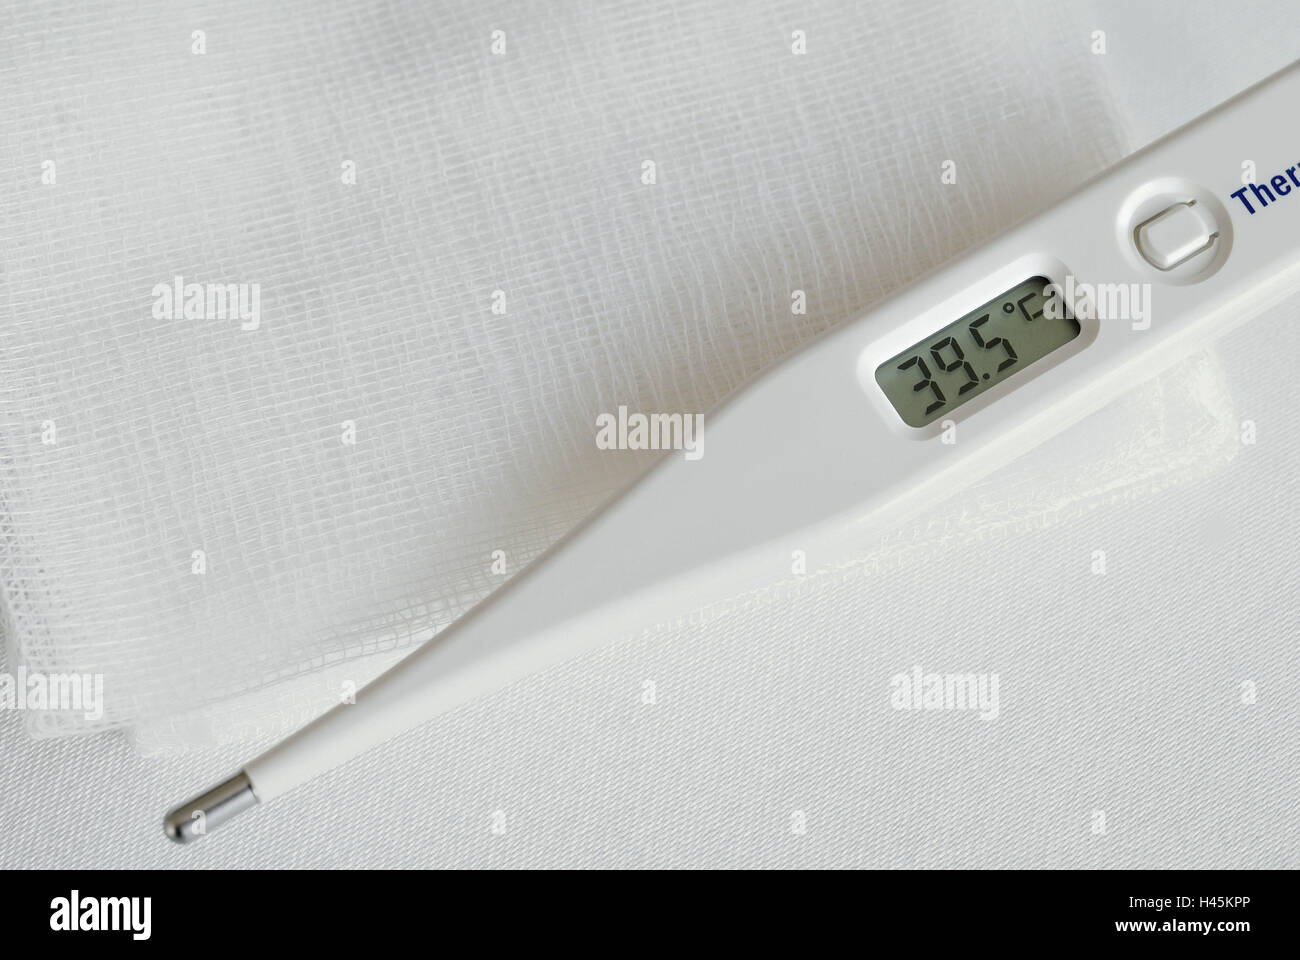 Clinical thermometer 39.5 degrees, detail, Stock Photo